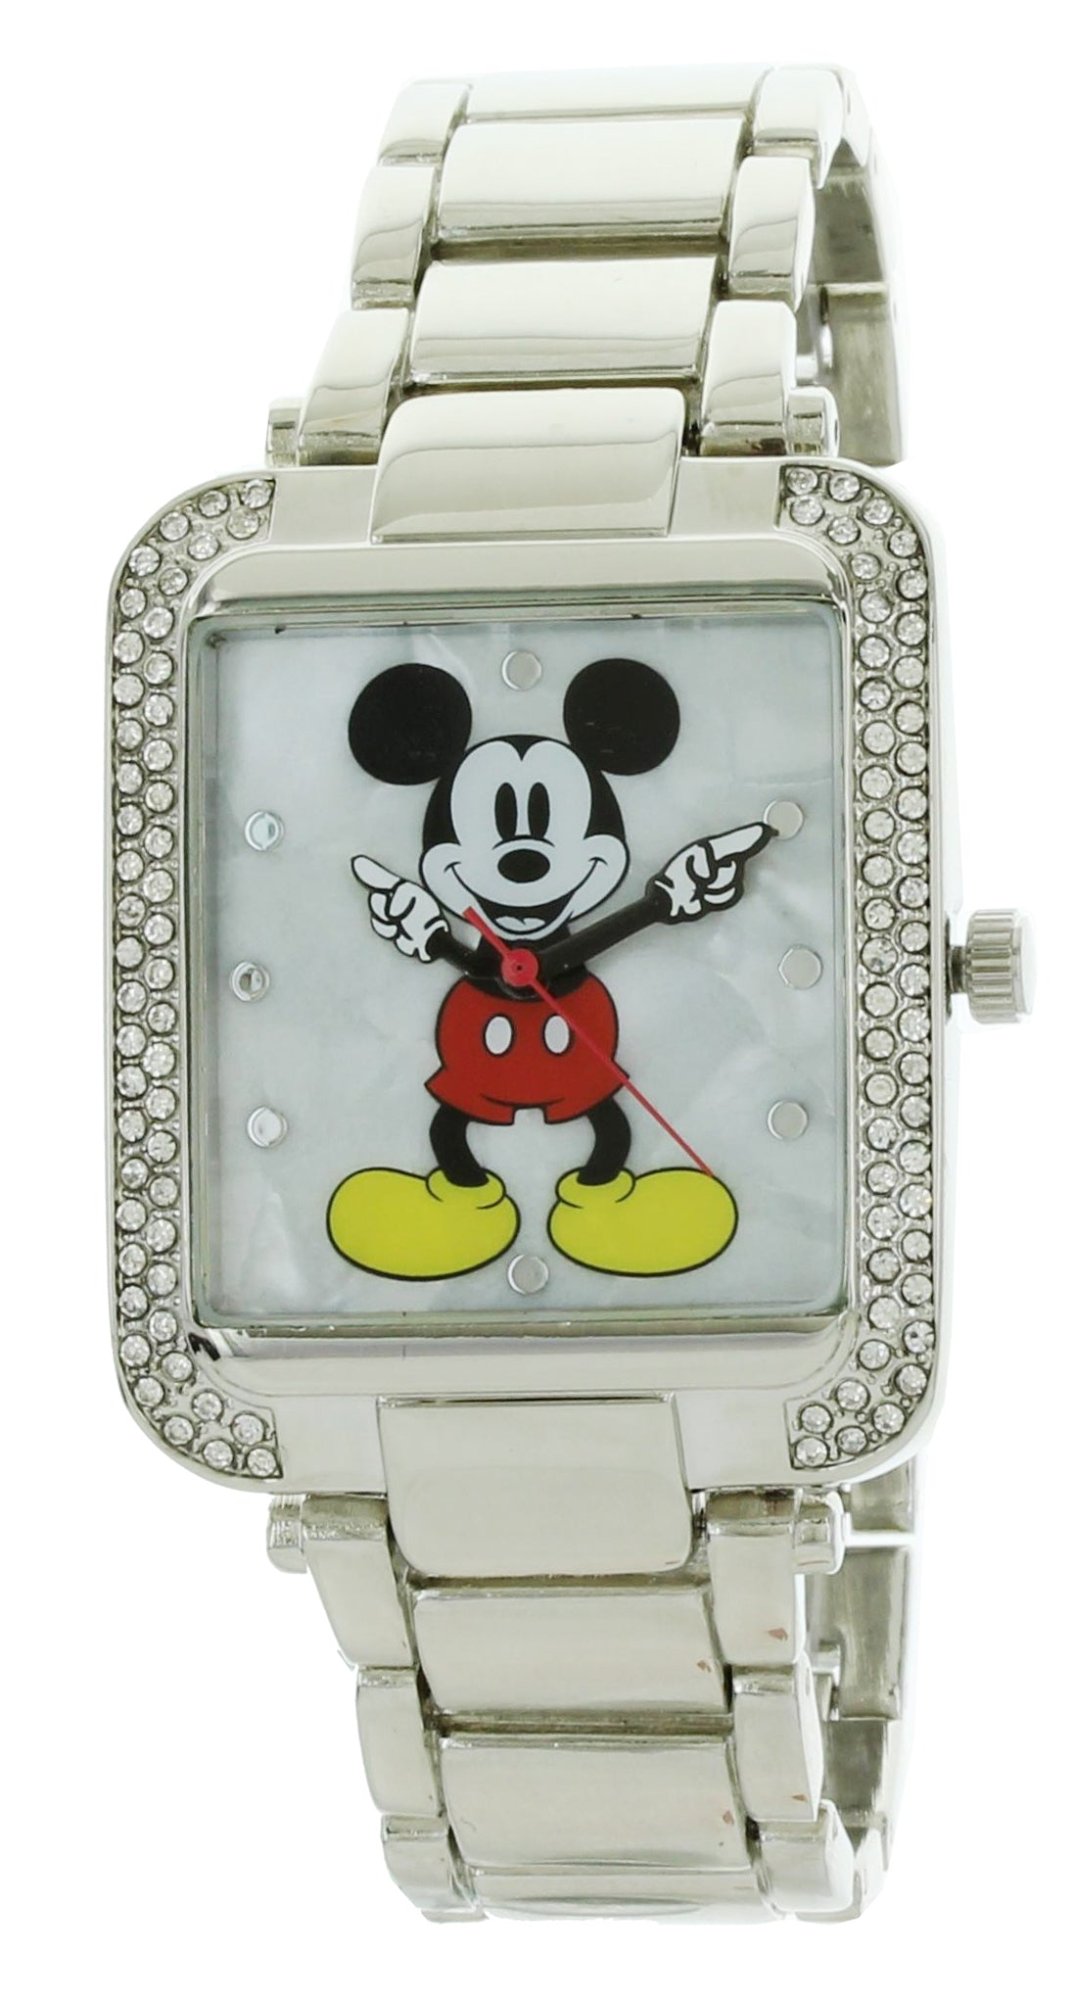 Model: Disney Time Works Mickey Mouse Watch with Square Face